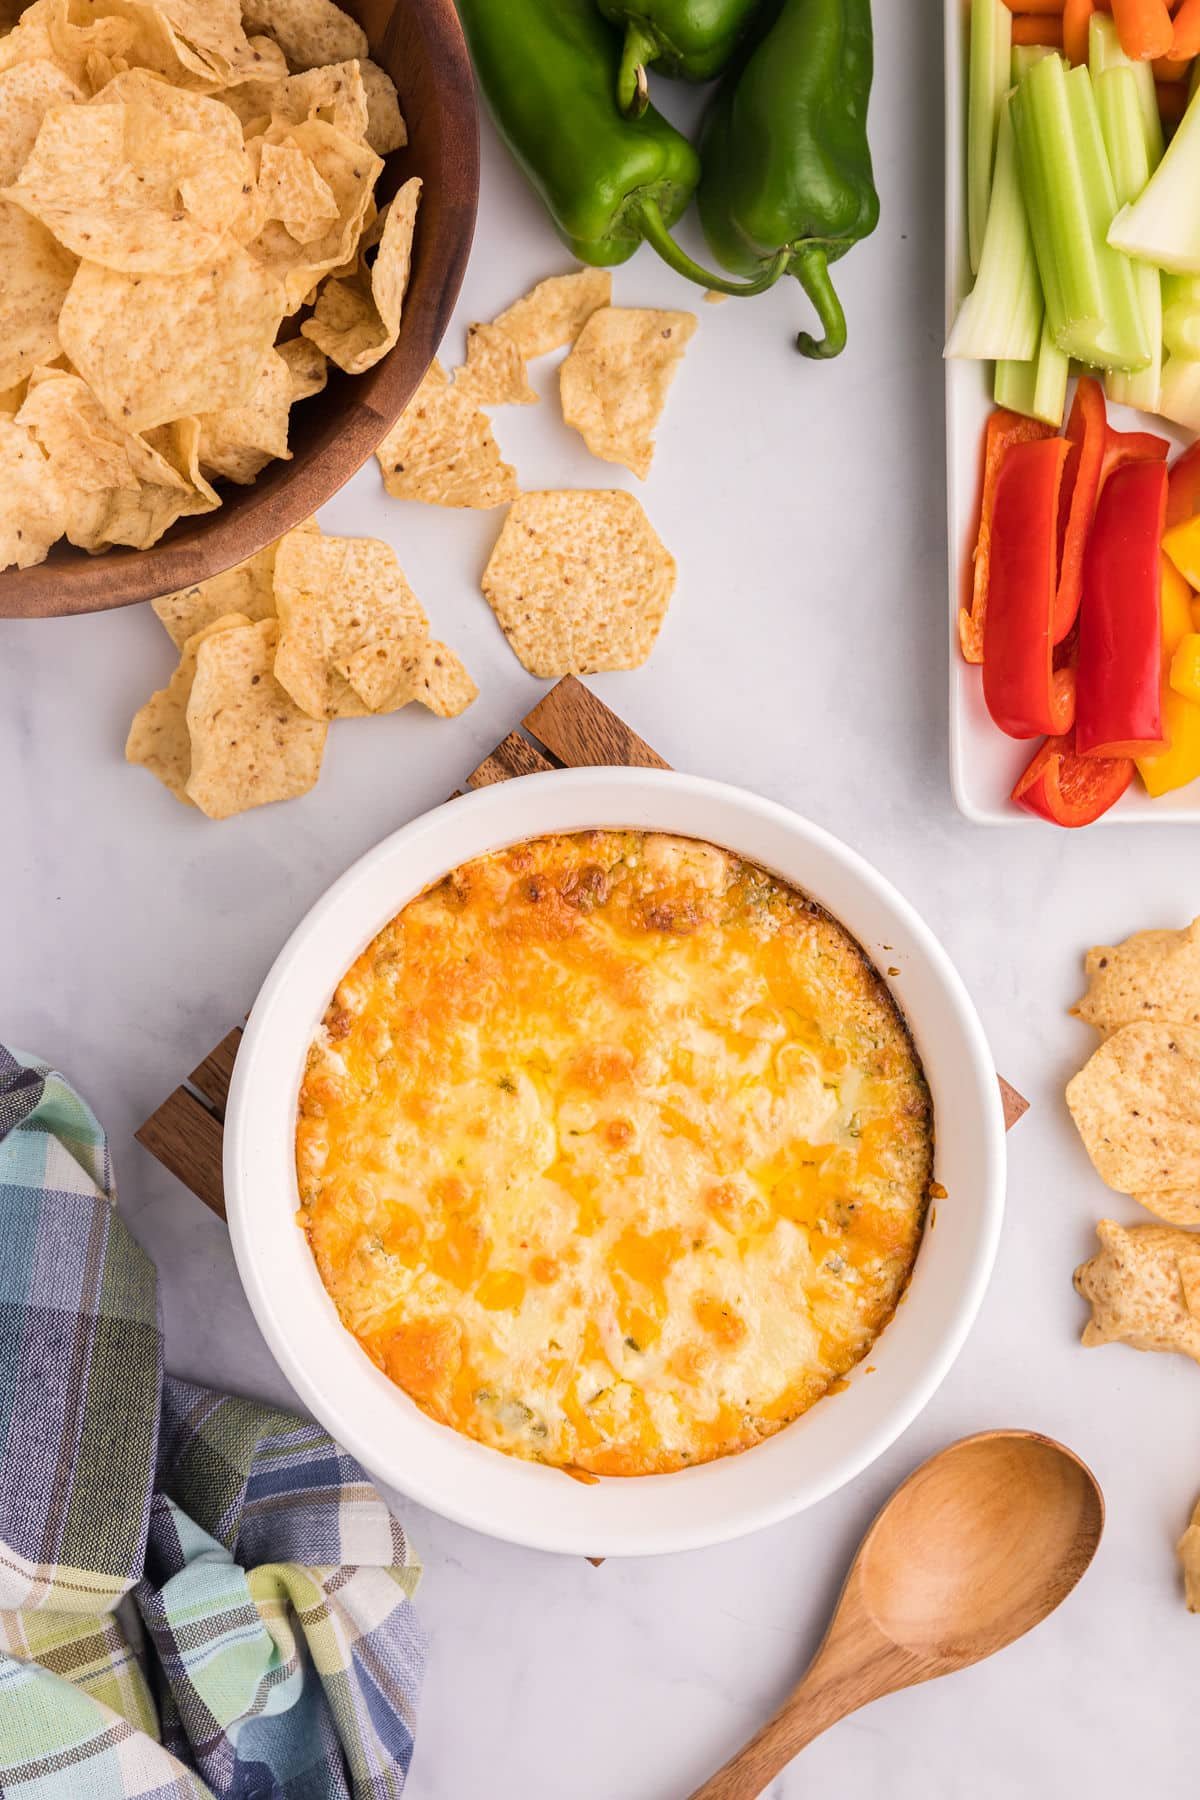 the baked dip with a bowl of chips and veggie sticks on the side.